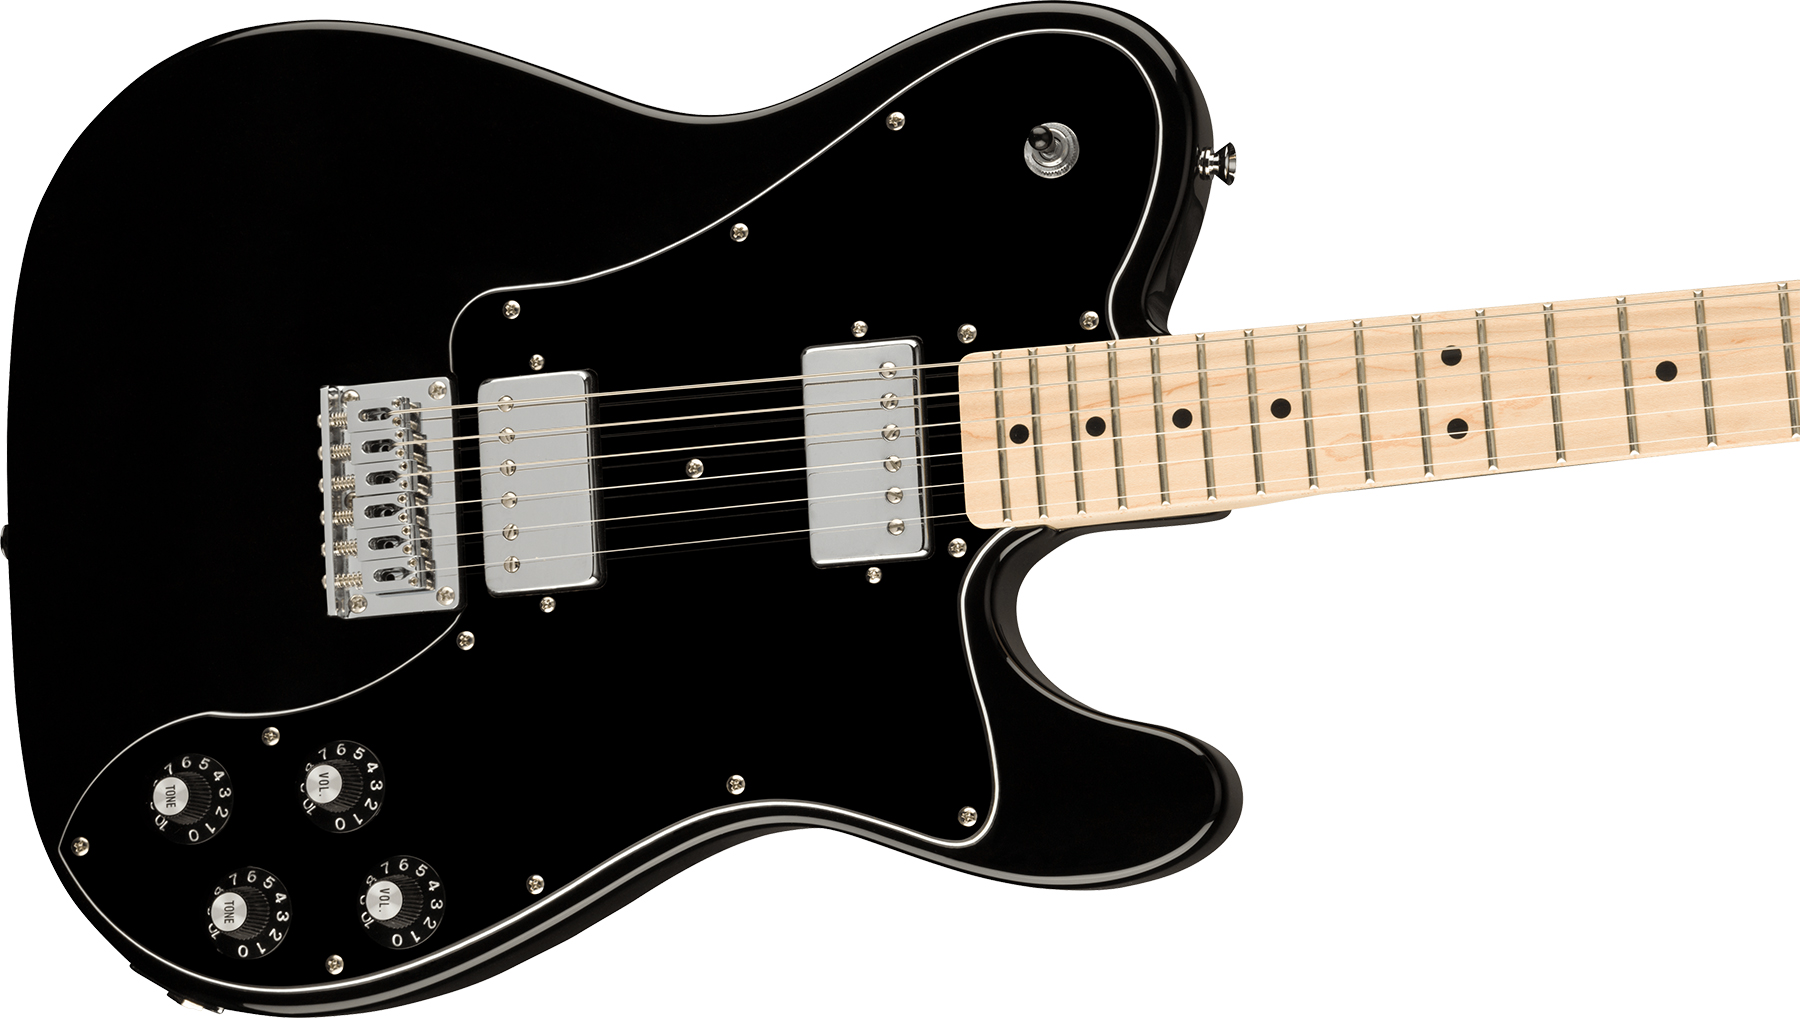 Squier Tele Affinity Deluxe 2021 Hh Ht Mn - Black - Tel shape electric guitar - Variation 2